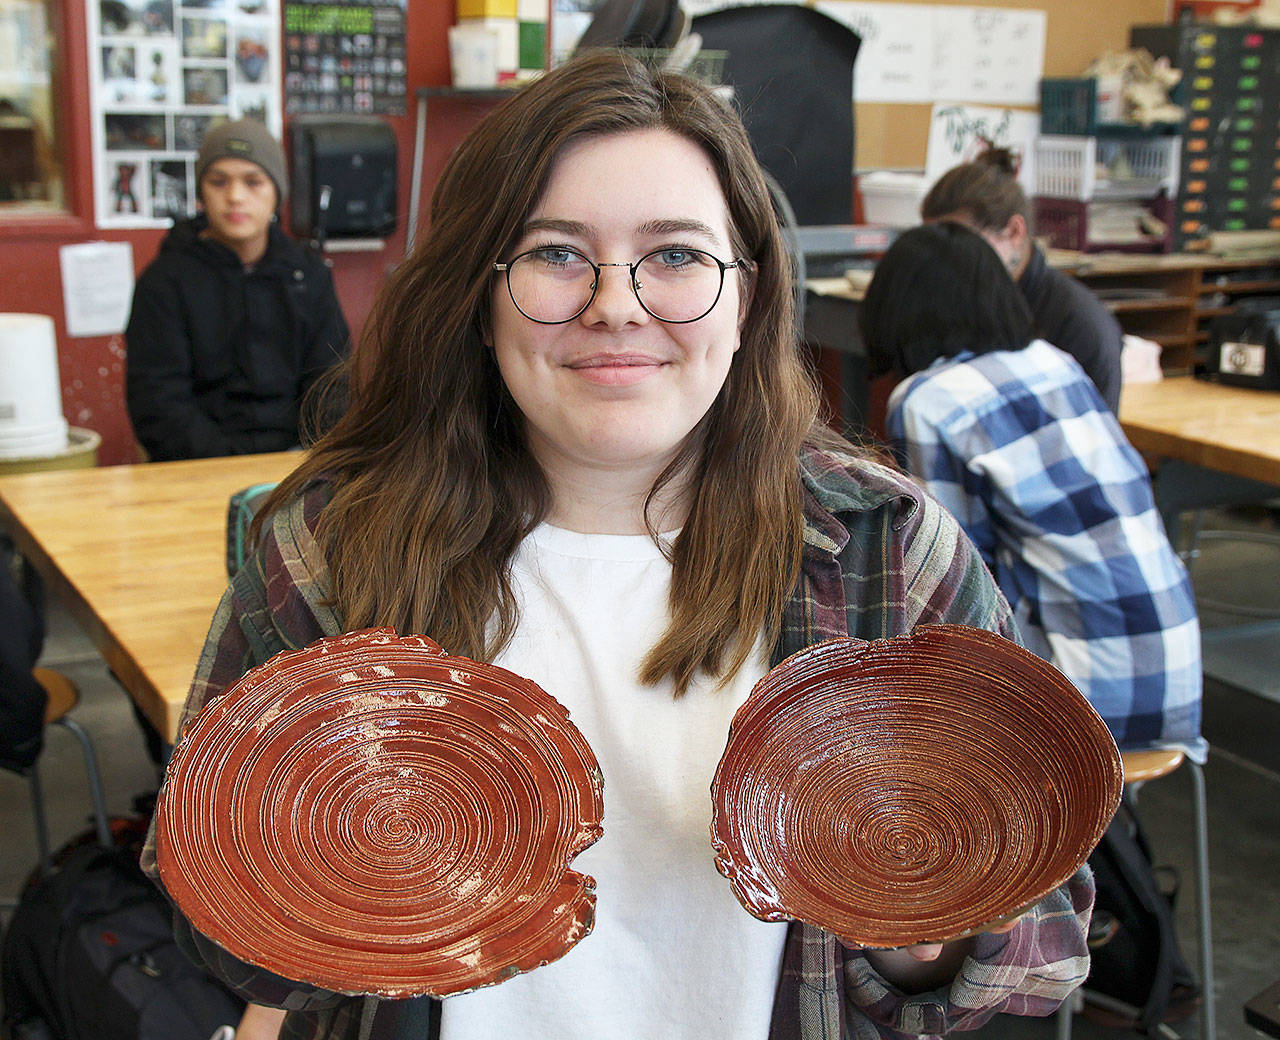 Senior Emma Hanson and her gold-key winning plate and bowl set. Photo by Laura Guido/Whidbey News-Times